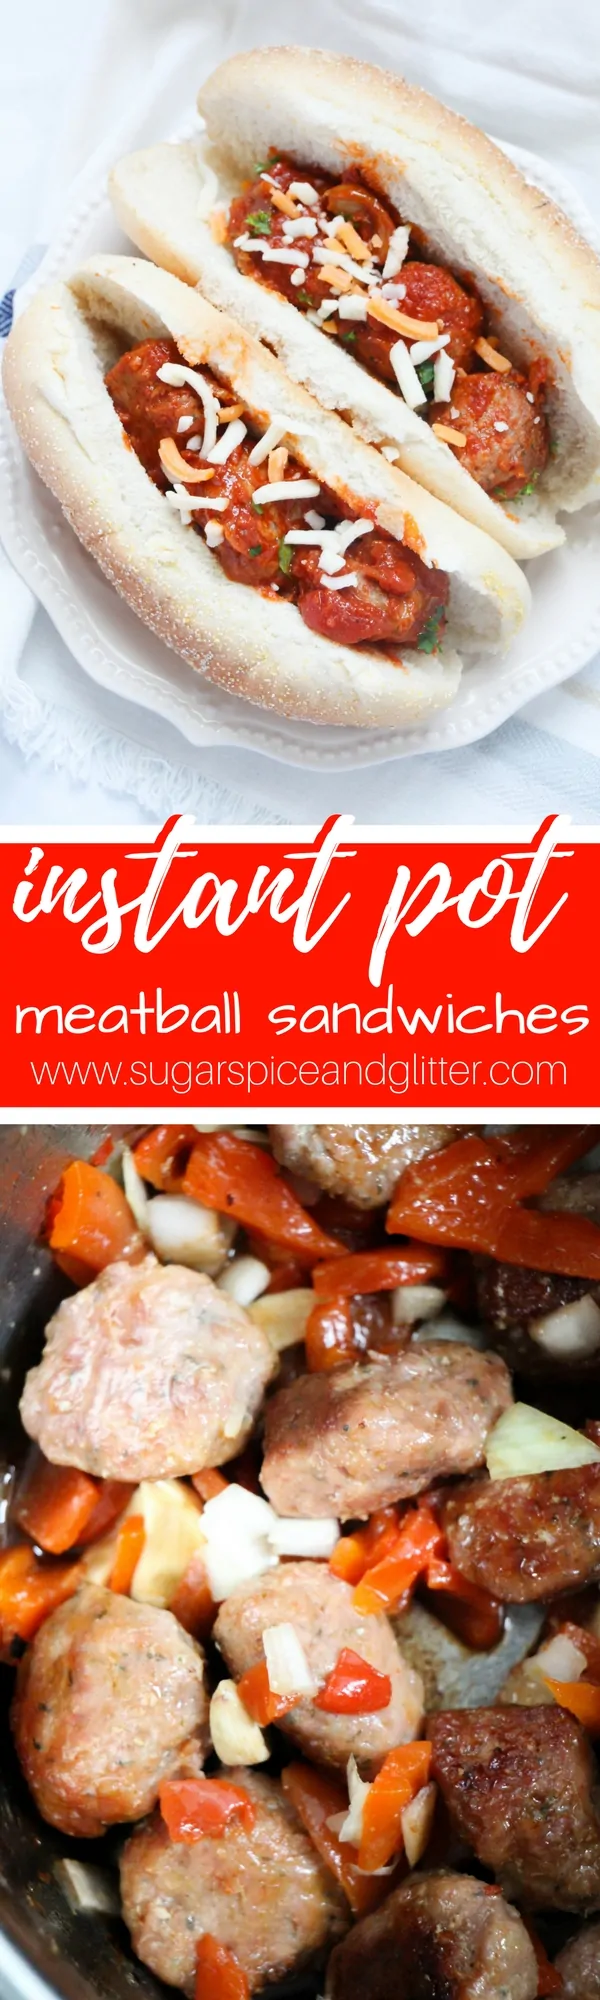 A delicious instant pot meatball recipe that works deliciously as homemade meatball sandwiches. Tender, flavorful meatballs in a veggie-rich sauce